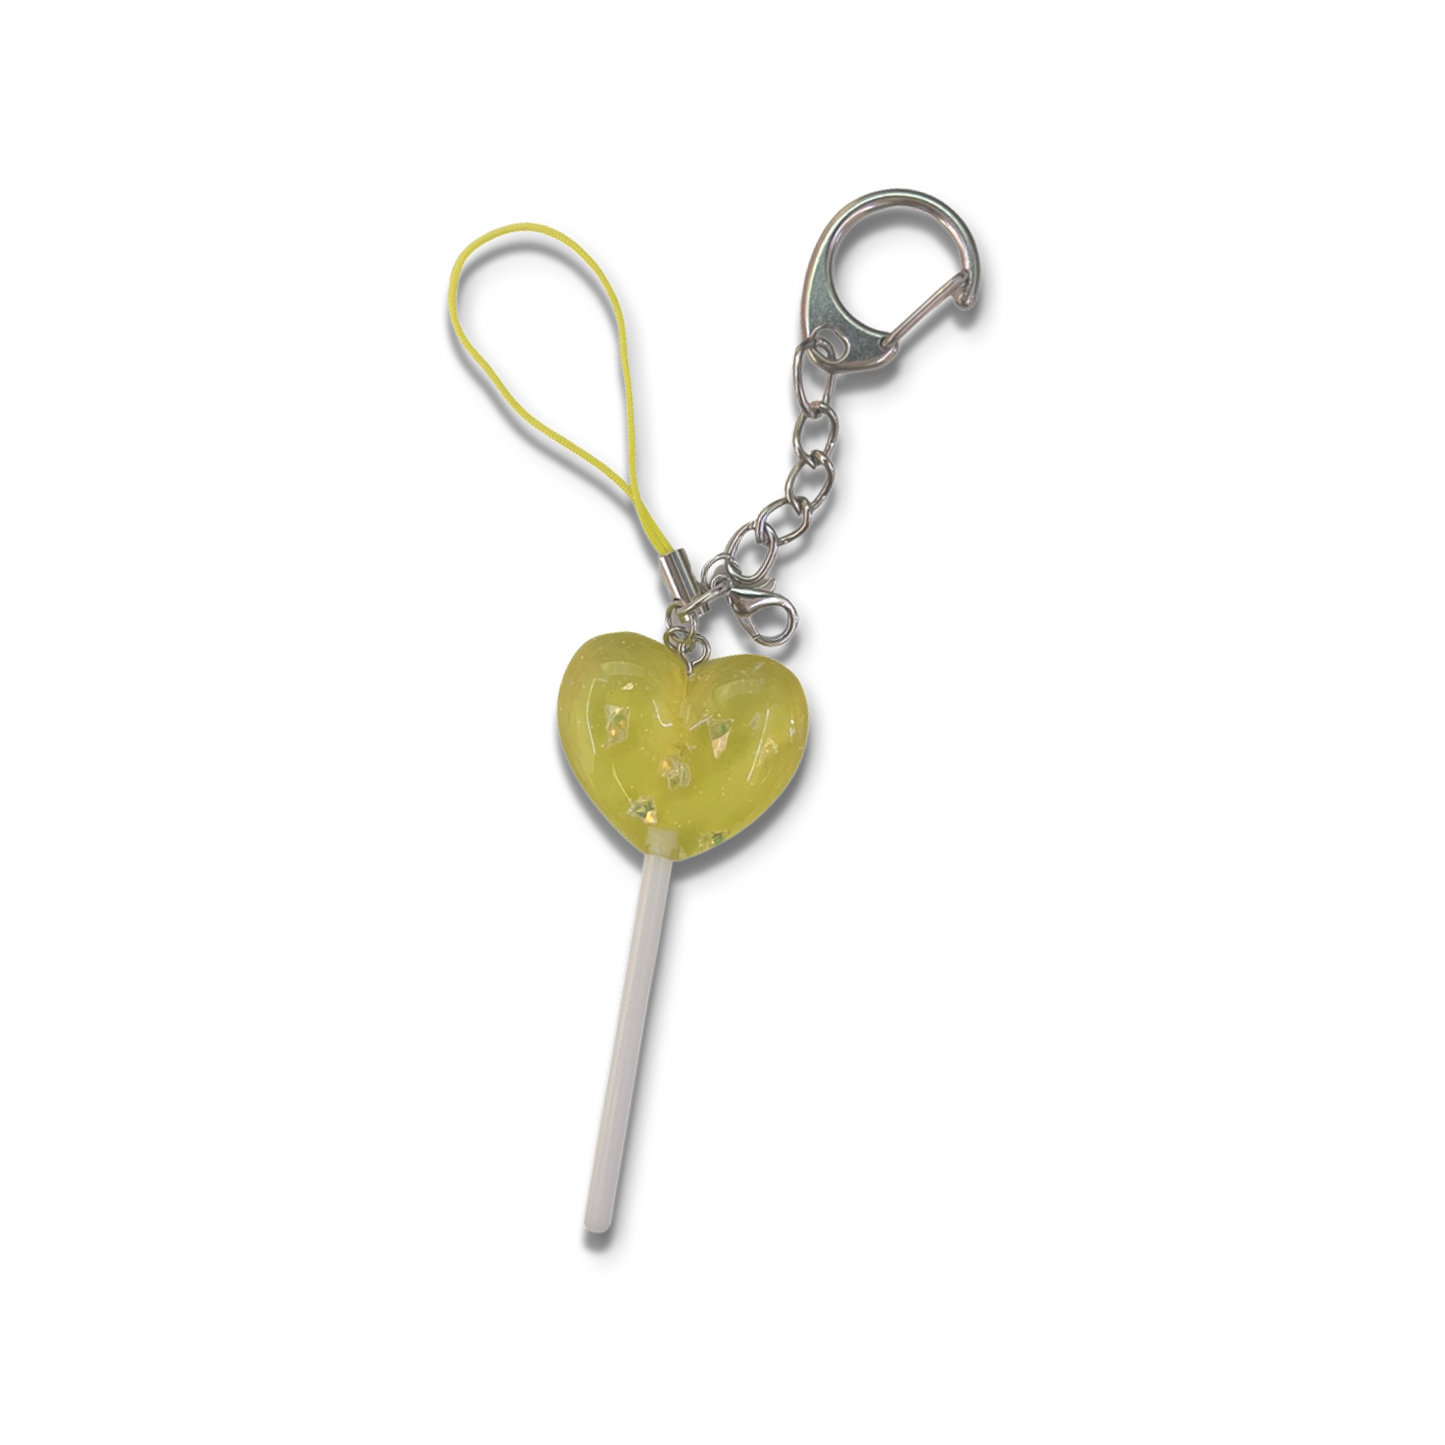 Big yellow sparkly lollipop with keychain and basic yellow phone strap.